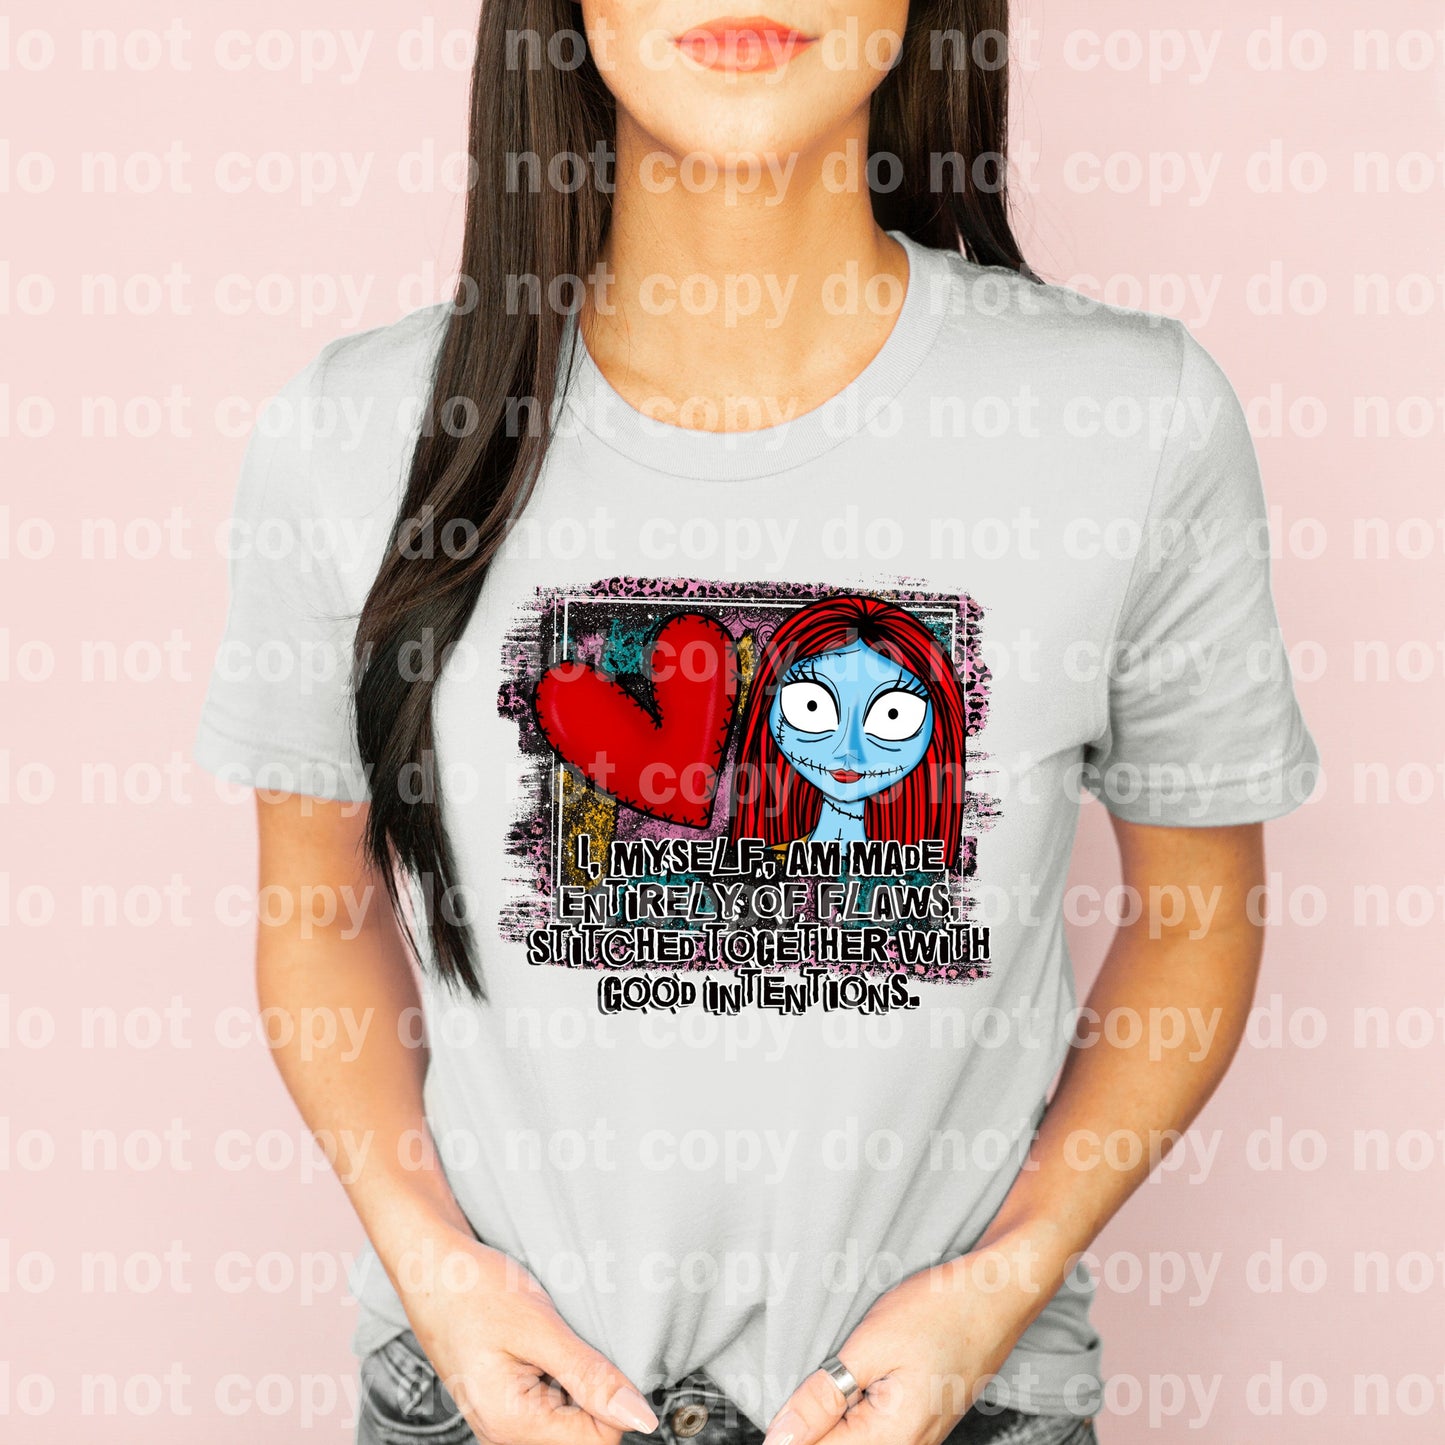 Stitched Together With Good Intentions Distressed Dream Print or Sublimation Print